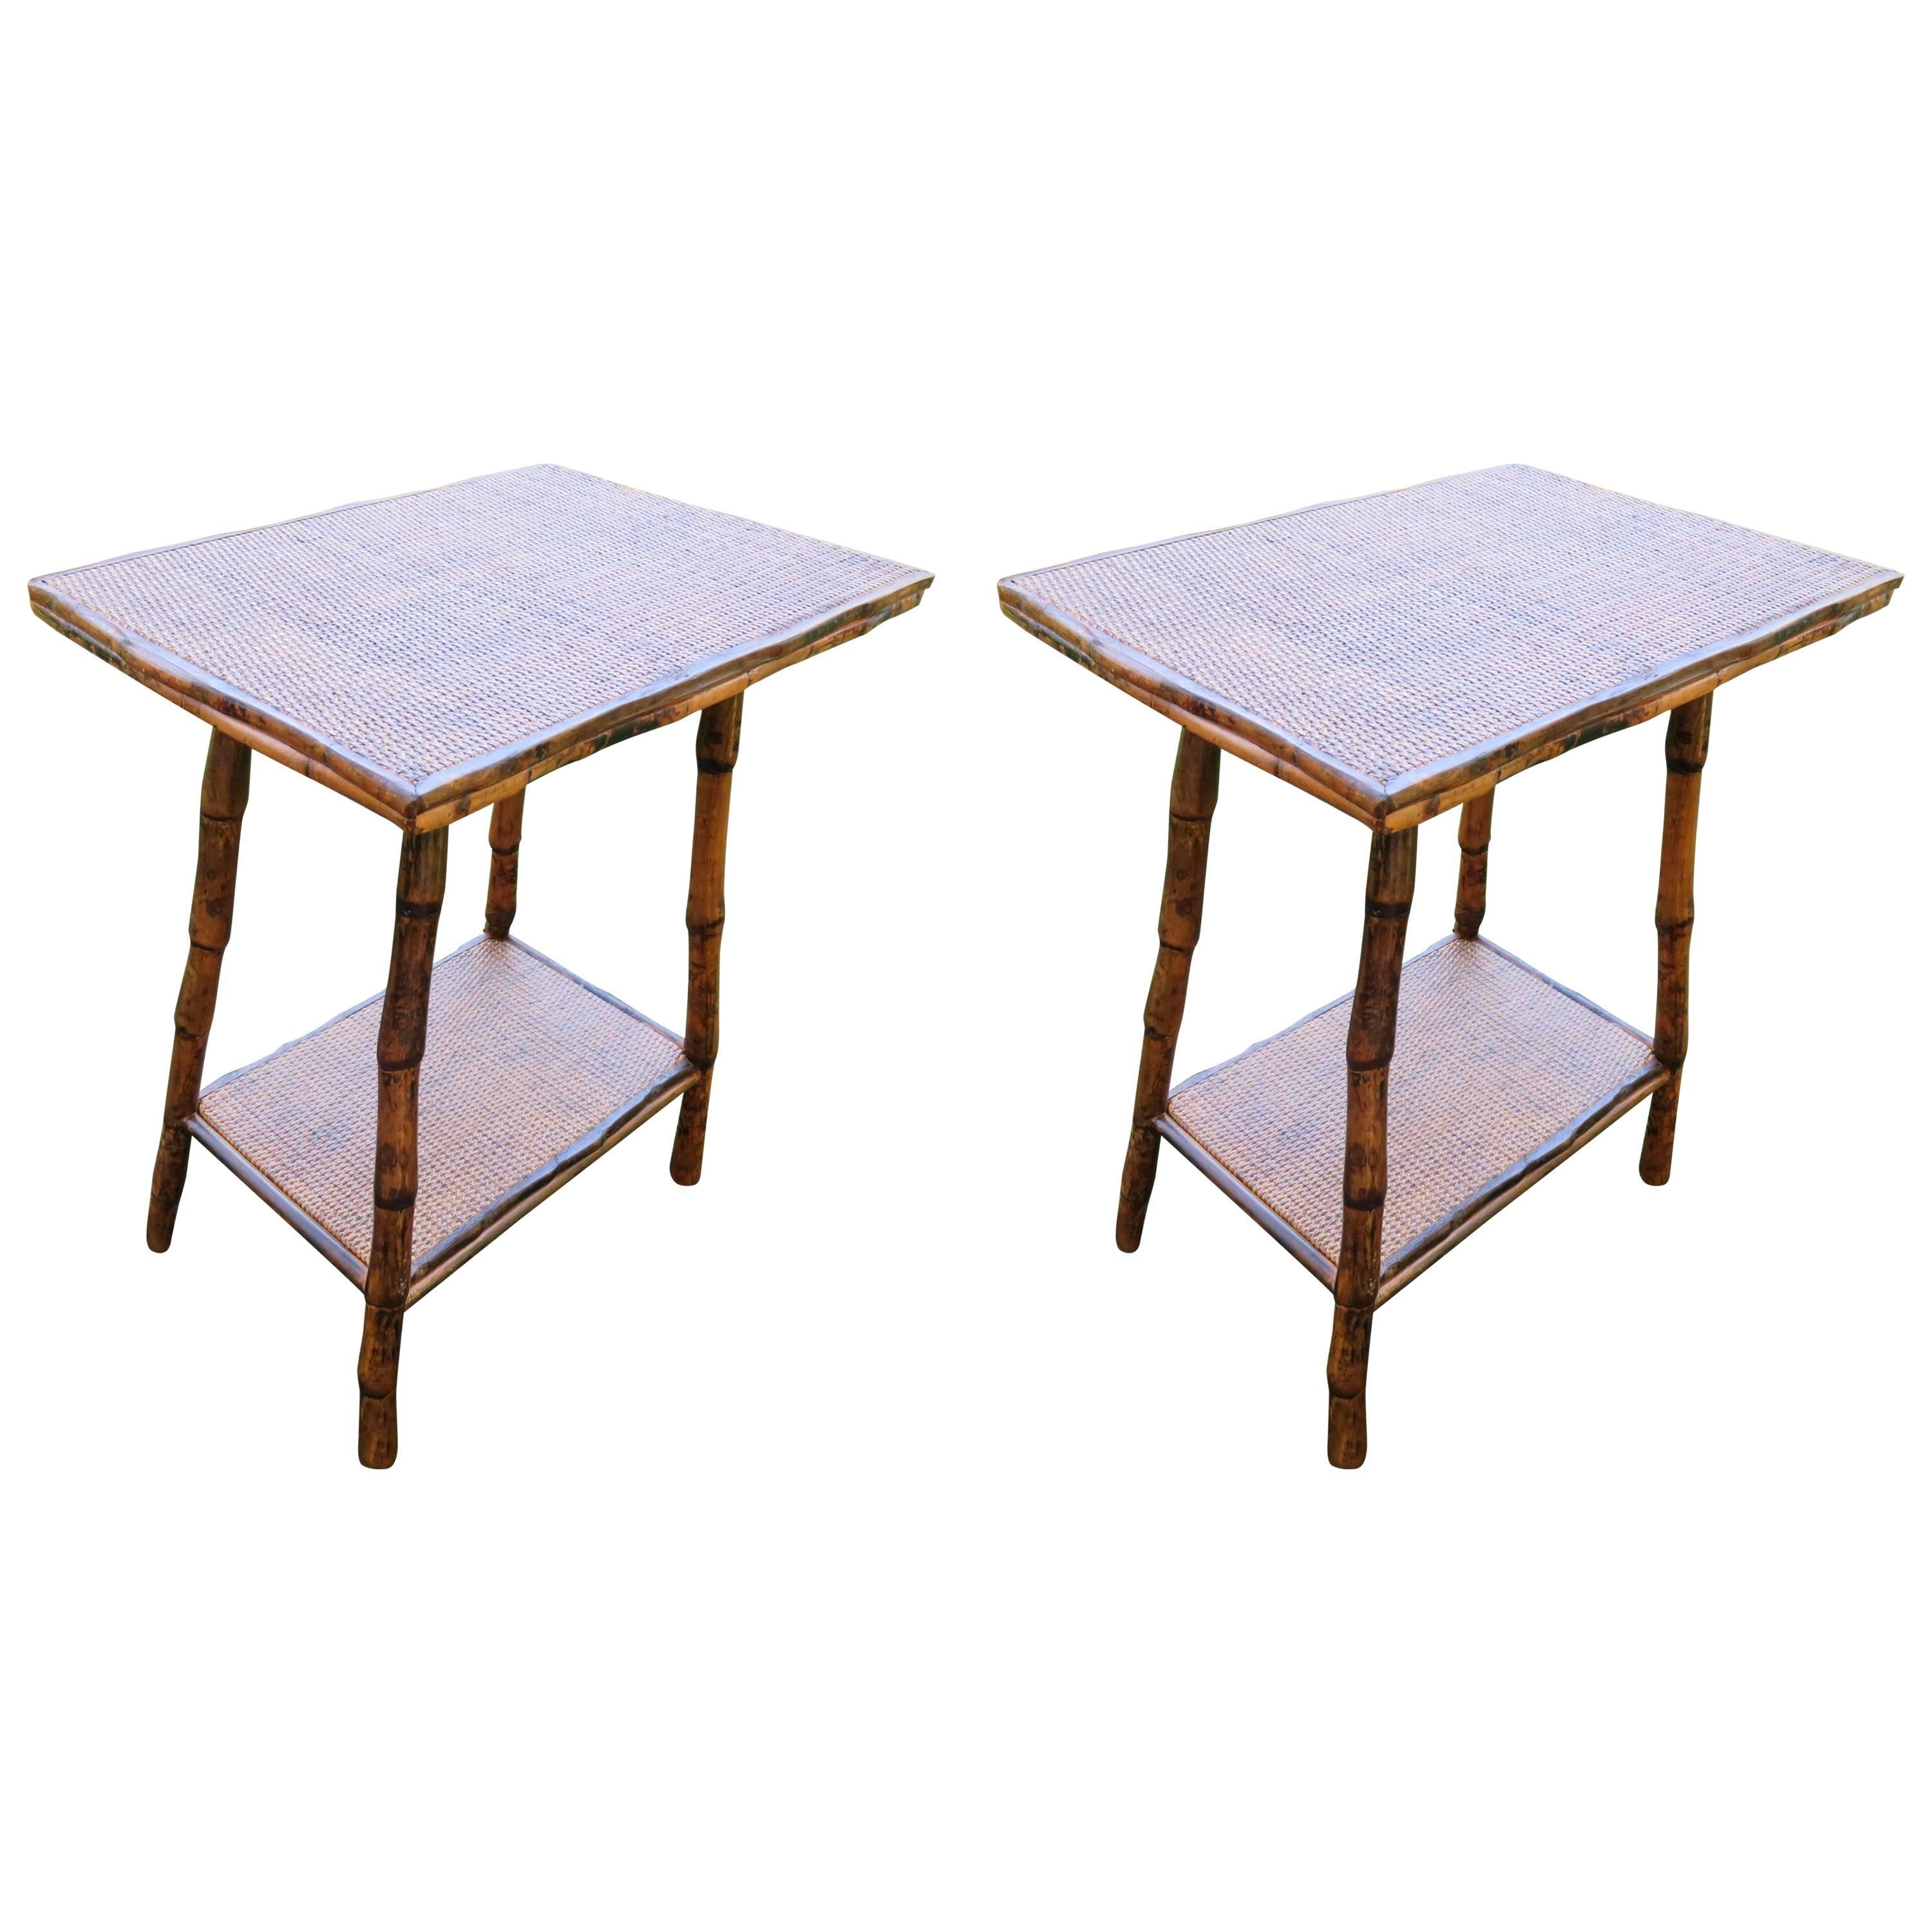 Pair of bamboo and cane rectangular side tables. Two levels with lots of room from lamps and books.